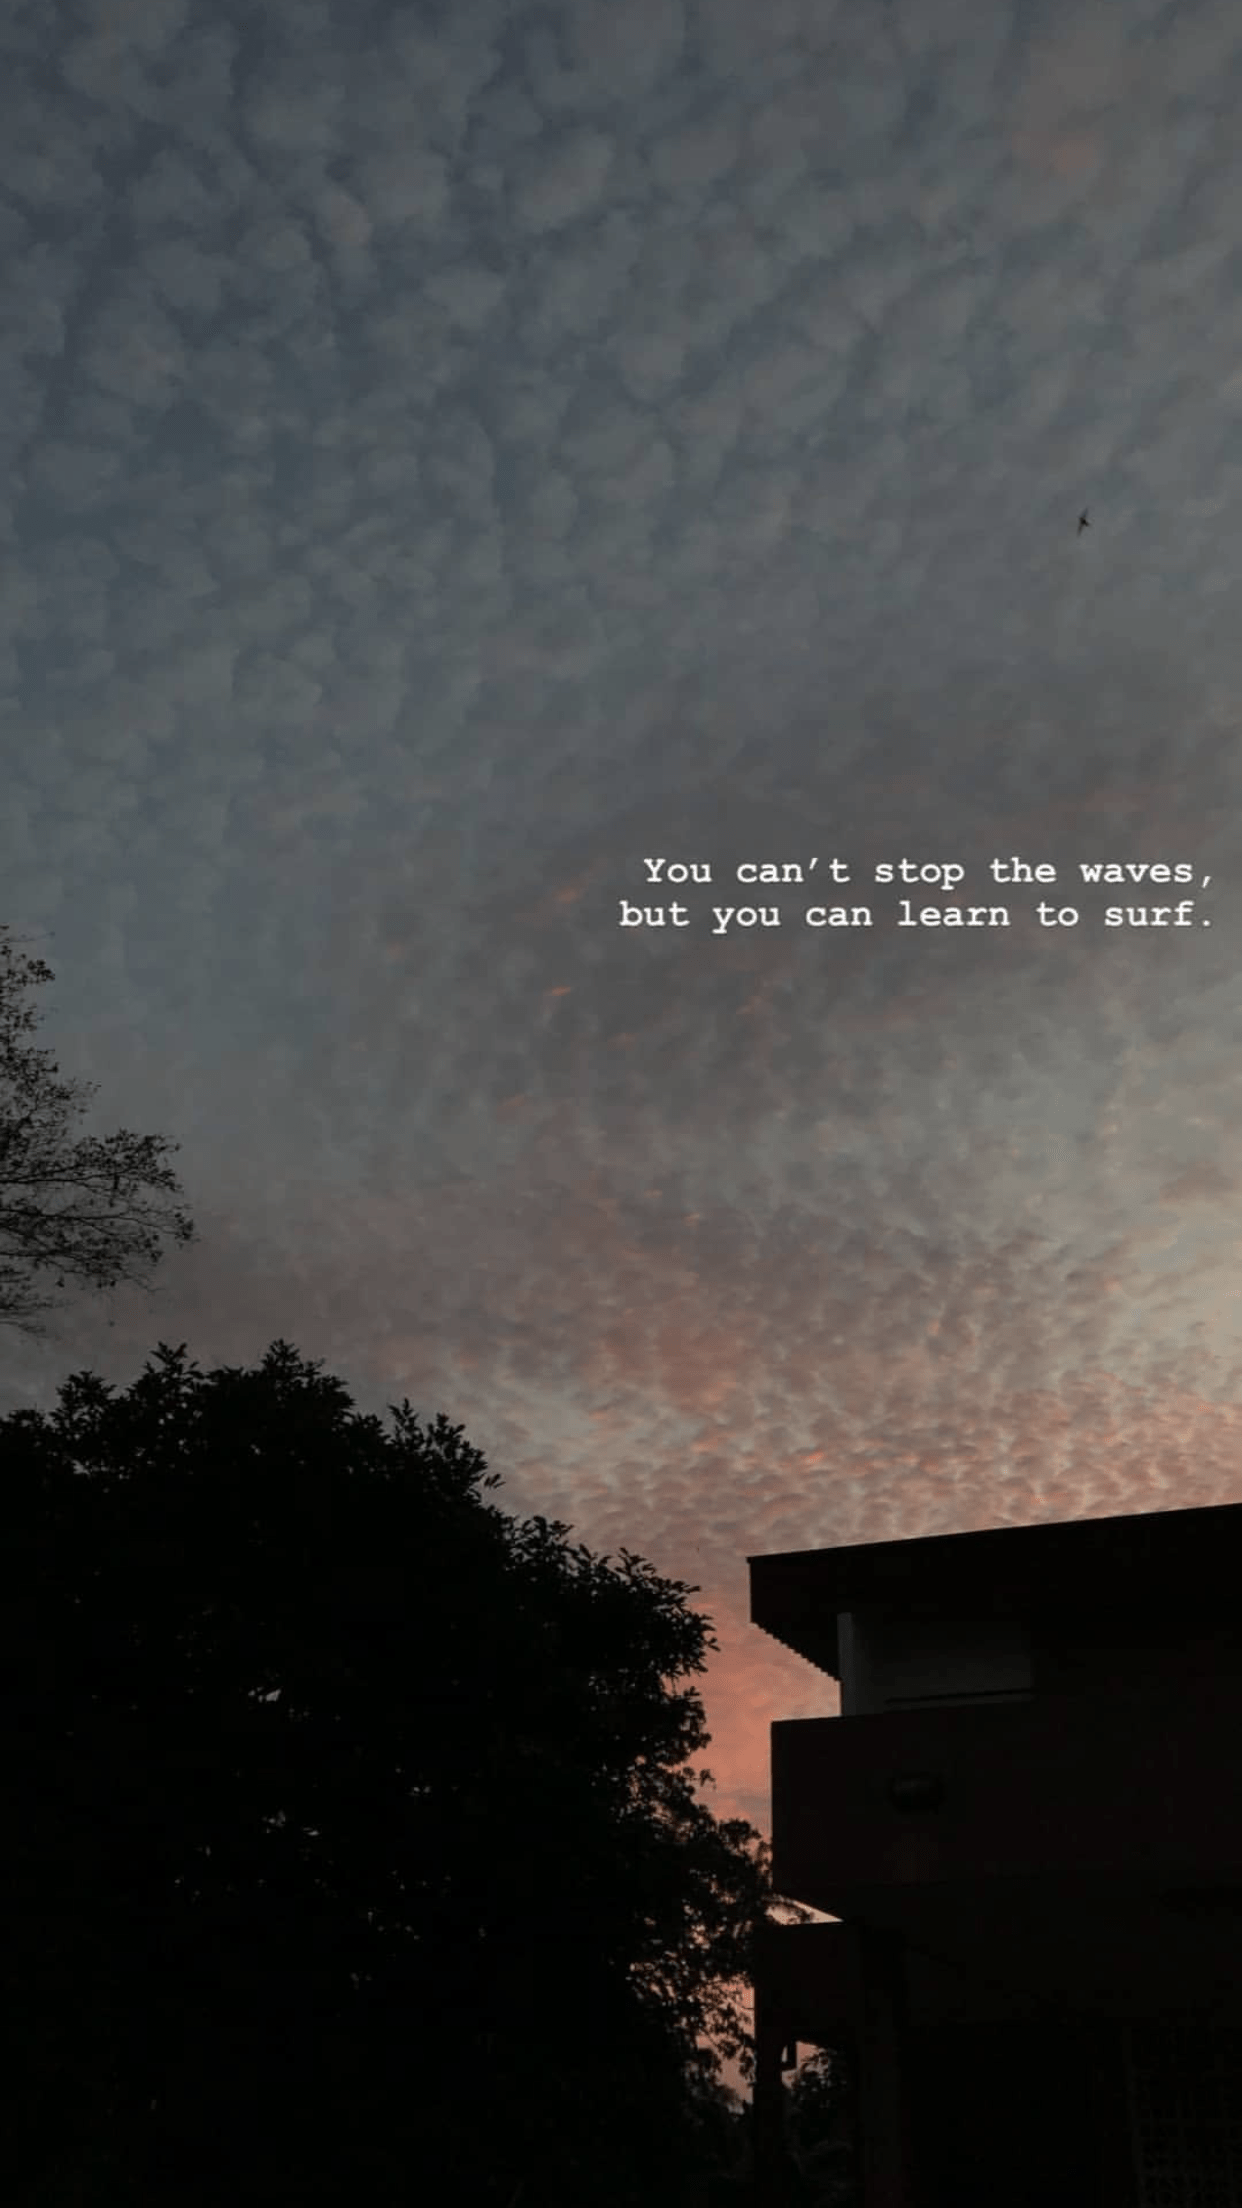 A sunset with clouds and buildings in the background - Sad quotes